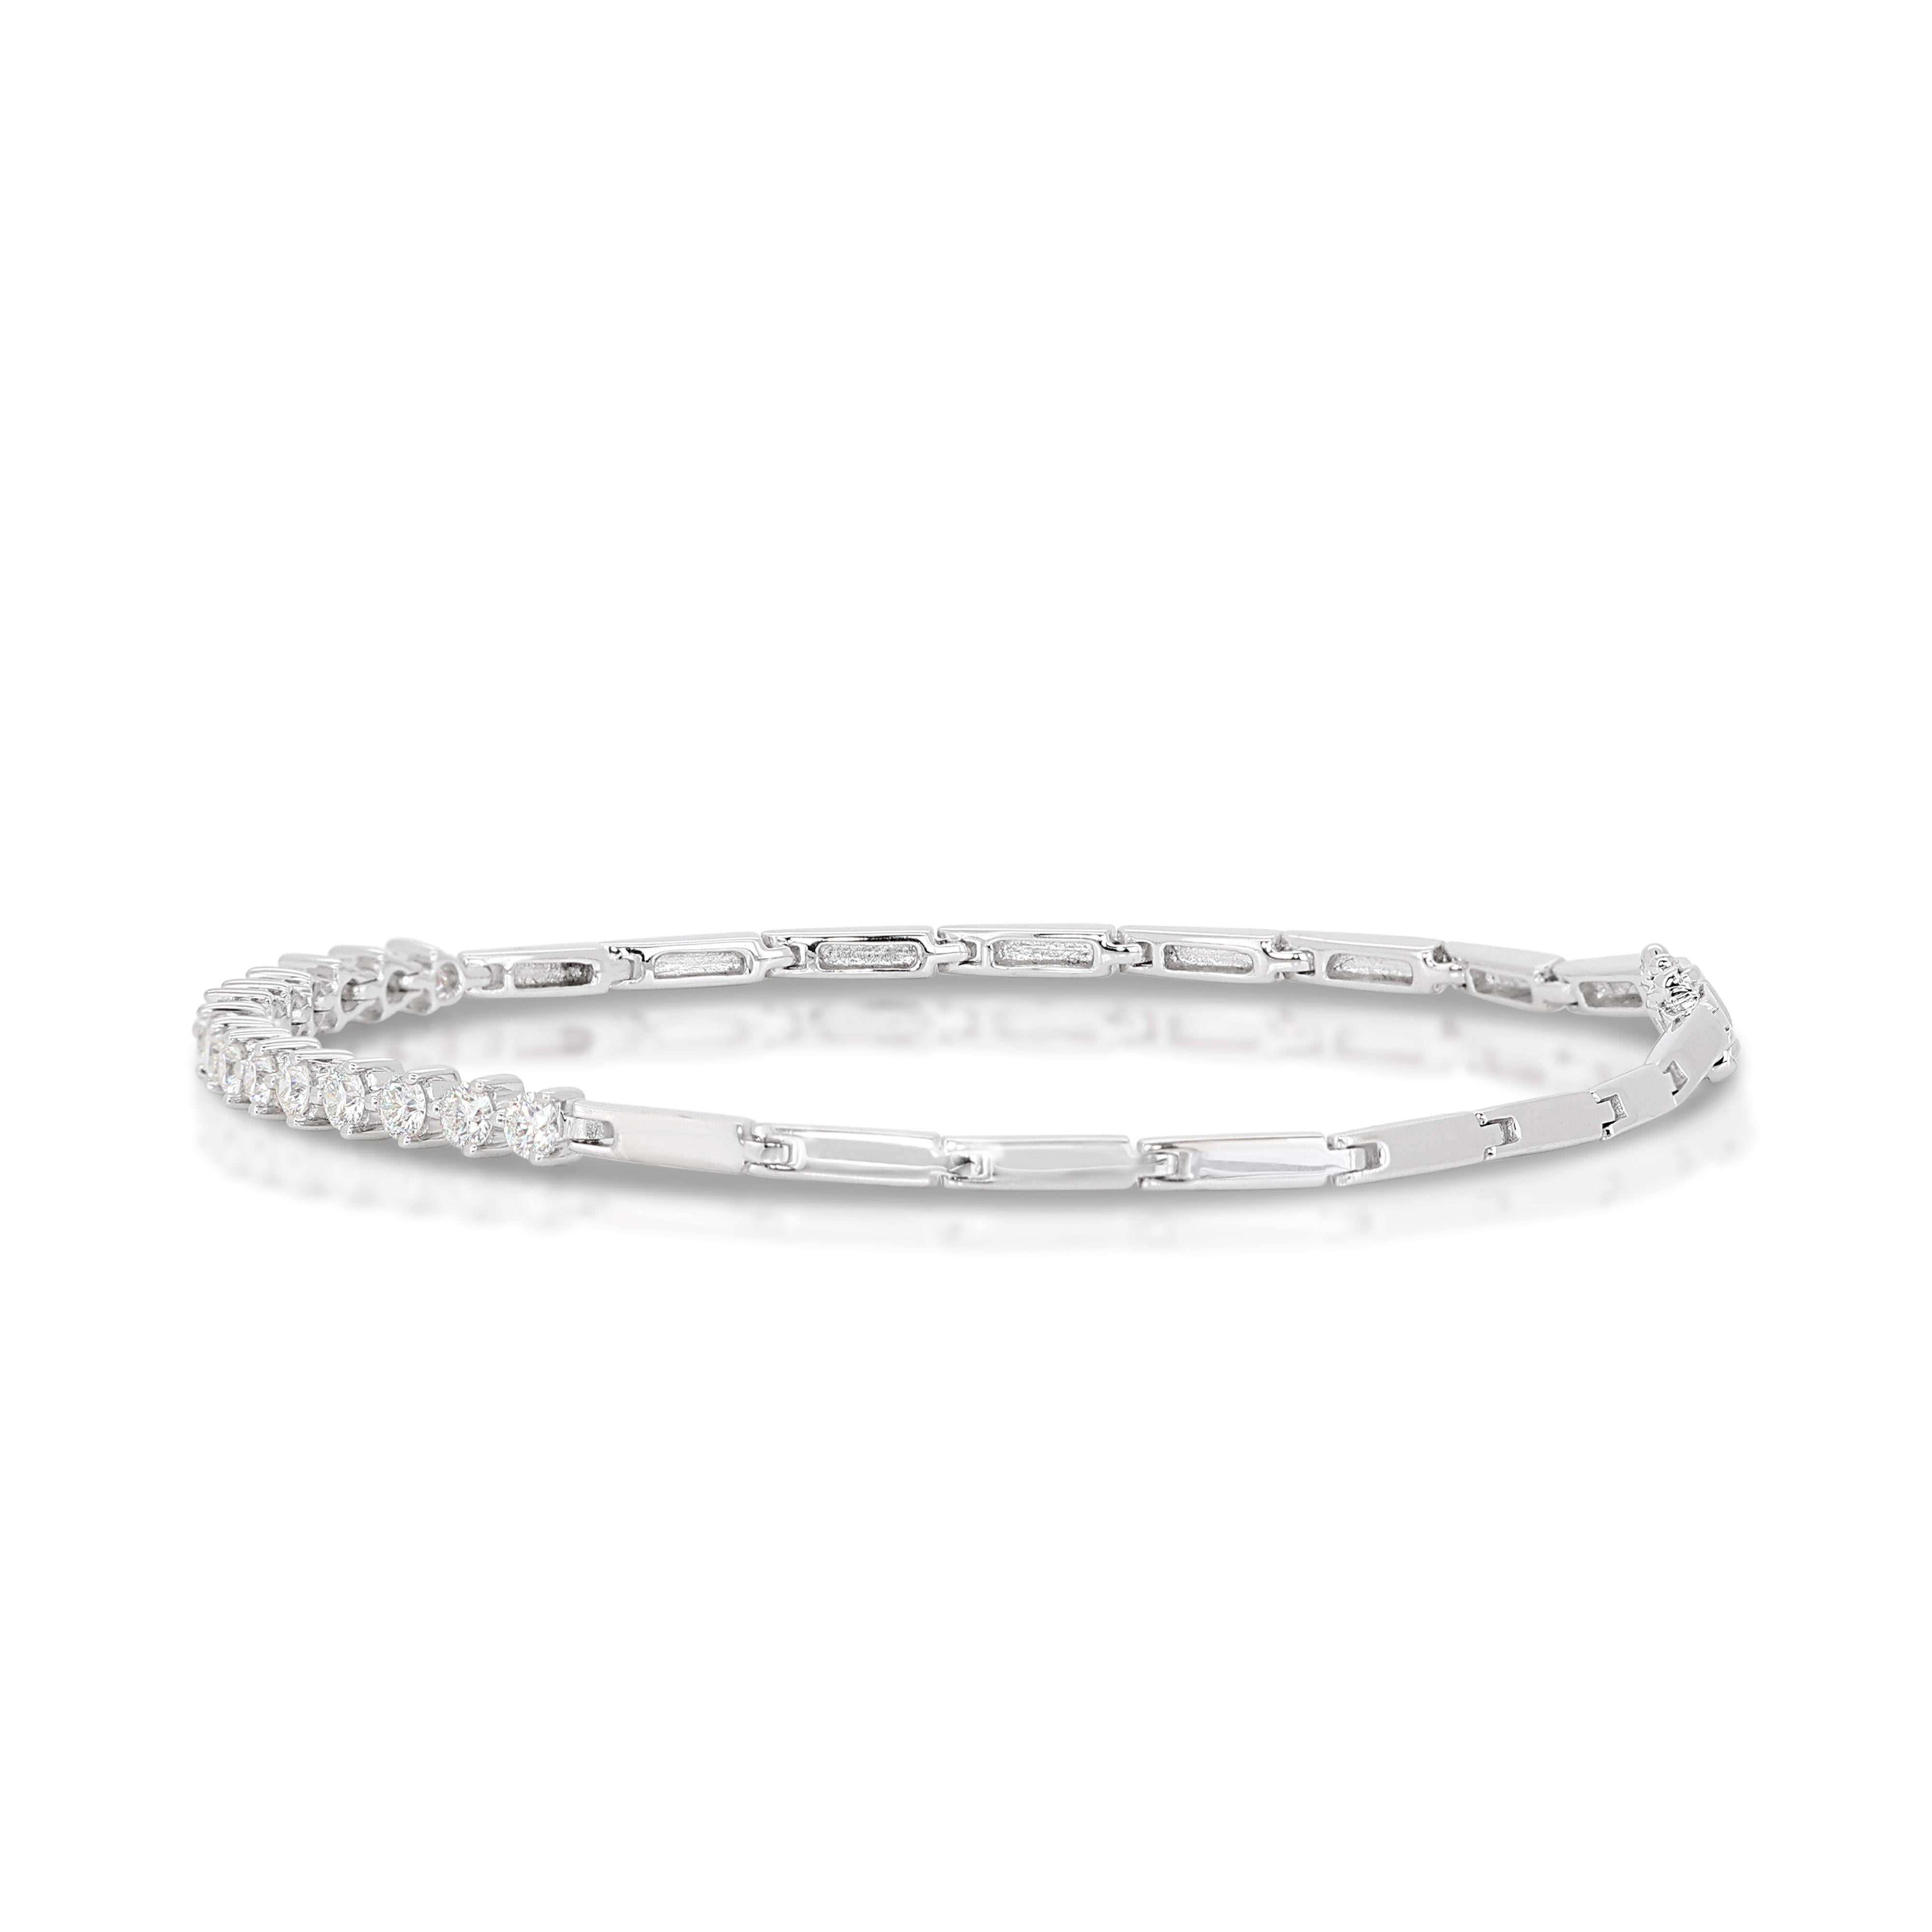 Round Cut Exquisite 0.75ct Eternity Diamond Bracelet set in 18K White Gold For Sale